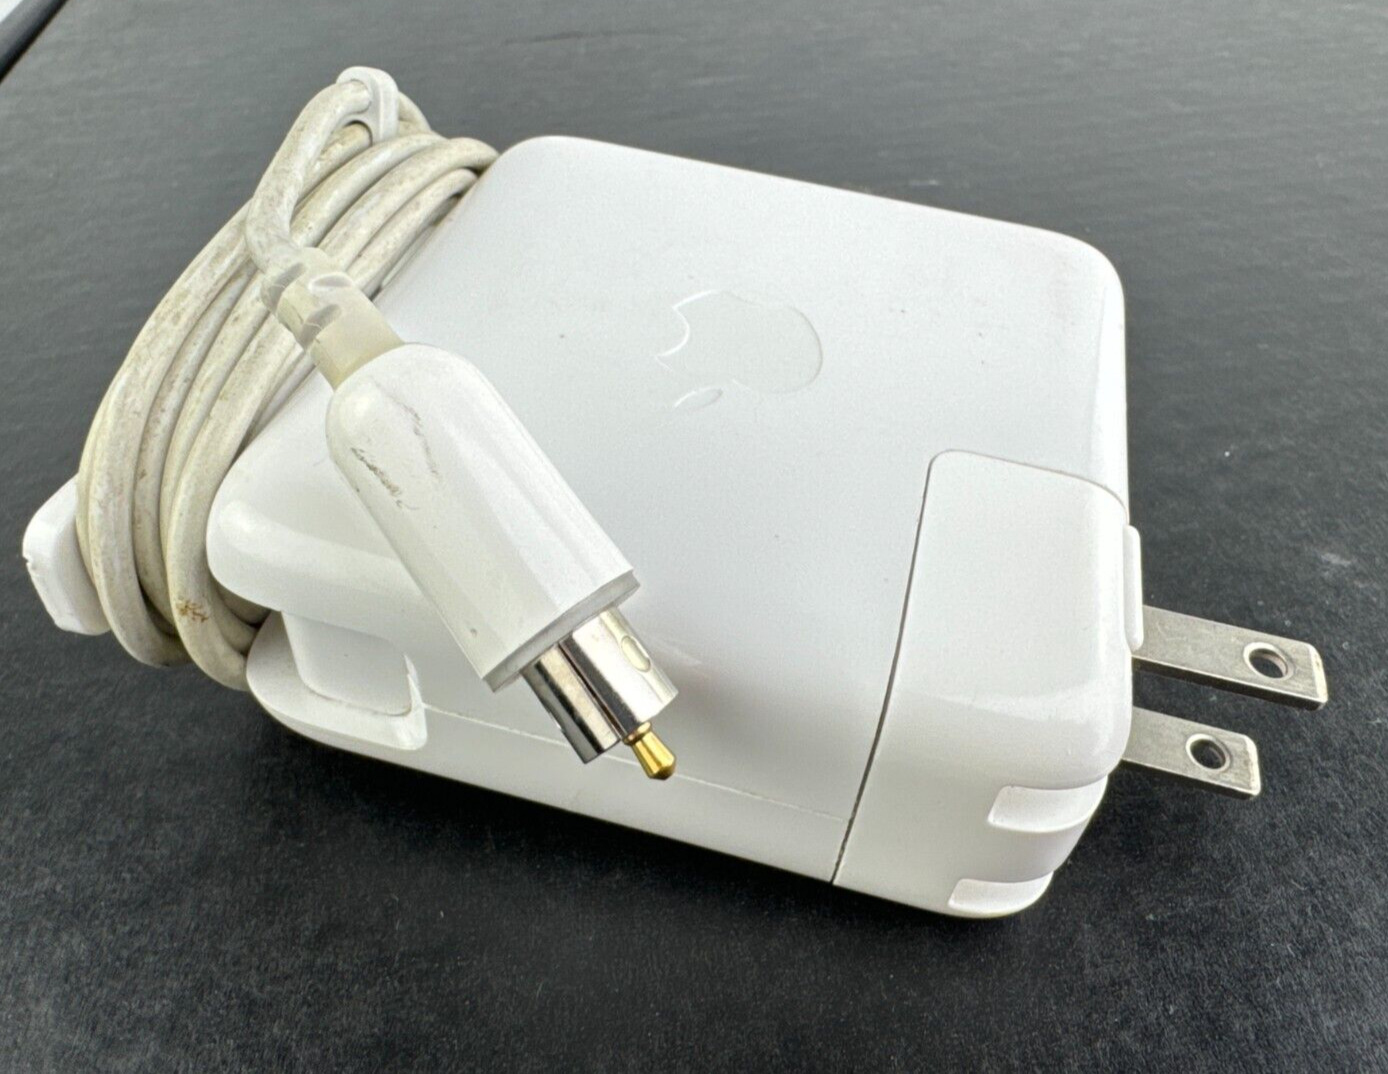 Genuine Apple iBook G3 G4 PowerBook Power Adapter Charger 45W A1036 I NOTE